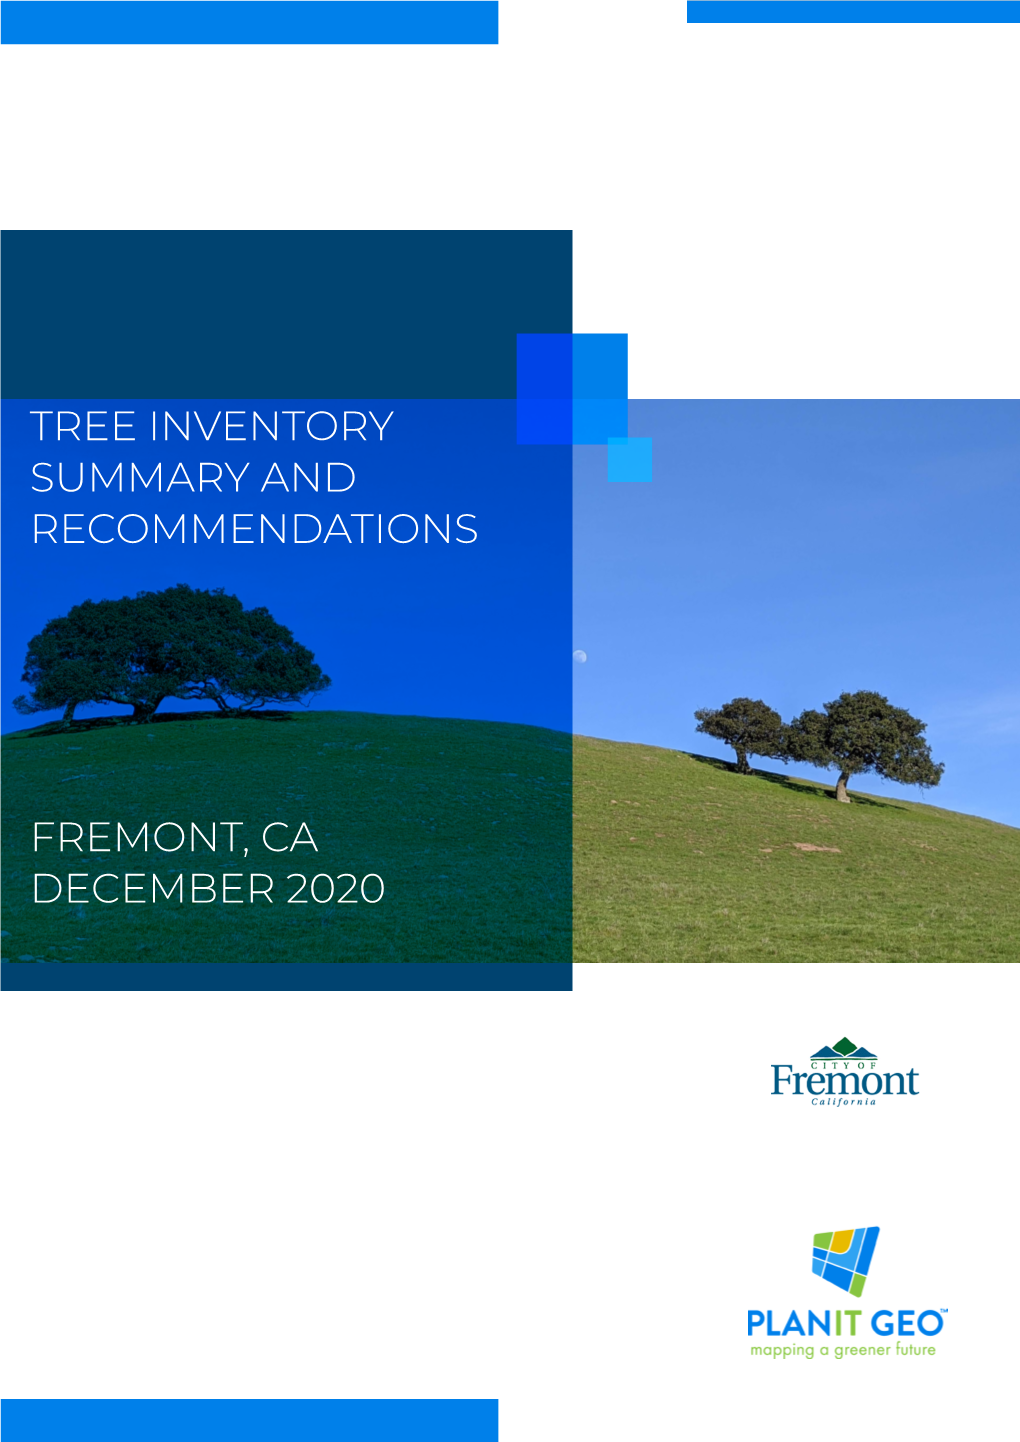 Tree Inventory Summary and Recommendations